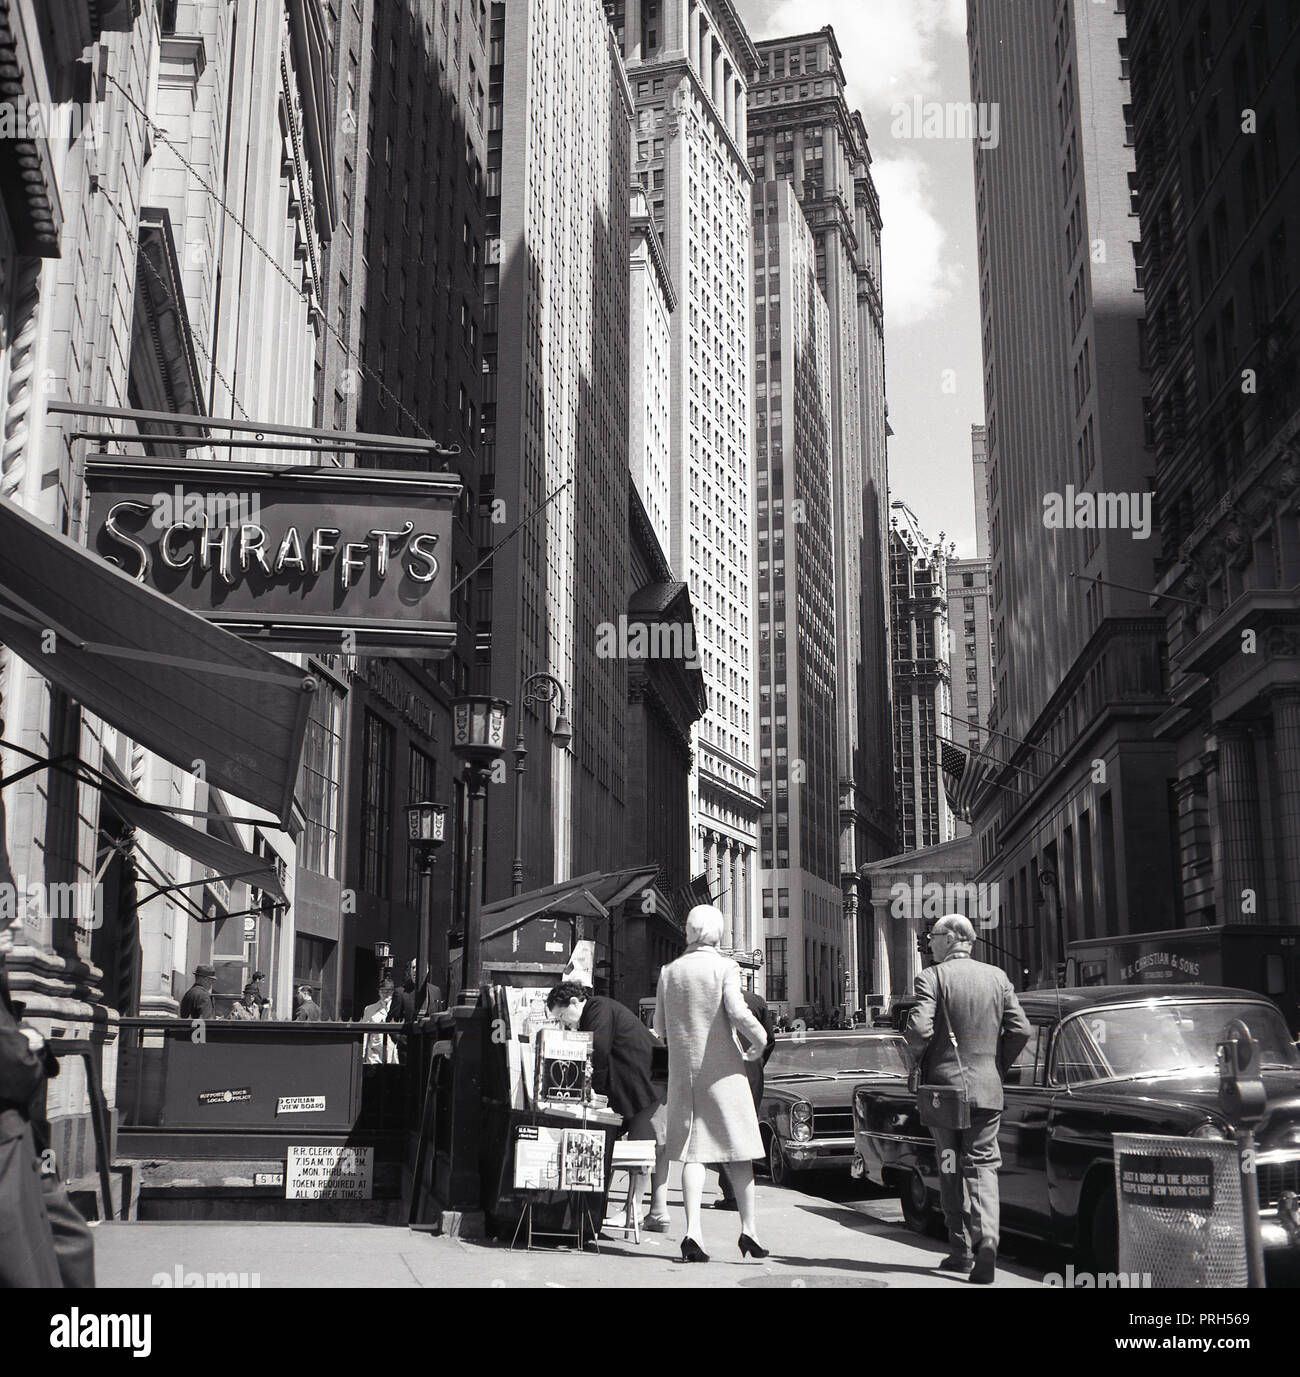 1950s, historical, New York city, Manhattan and a view down Wall street  showing the tall office blocks and skyscrapers of the financial district  and a sign for Schrafft's, a famous chain of